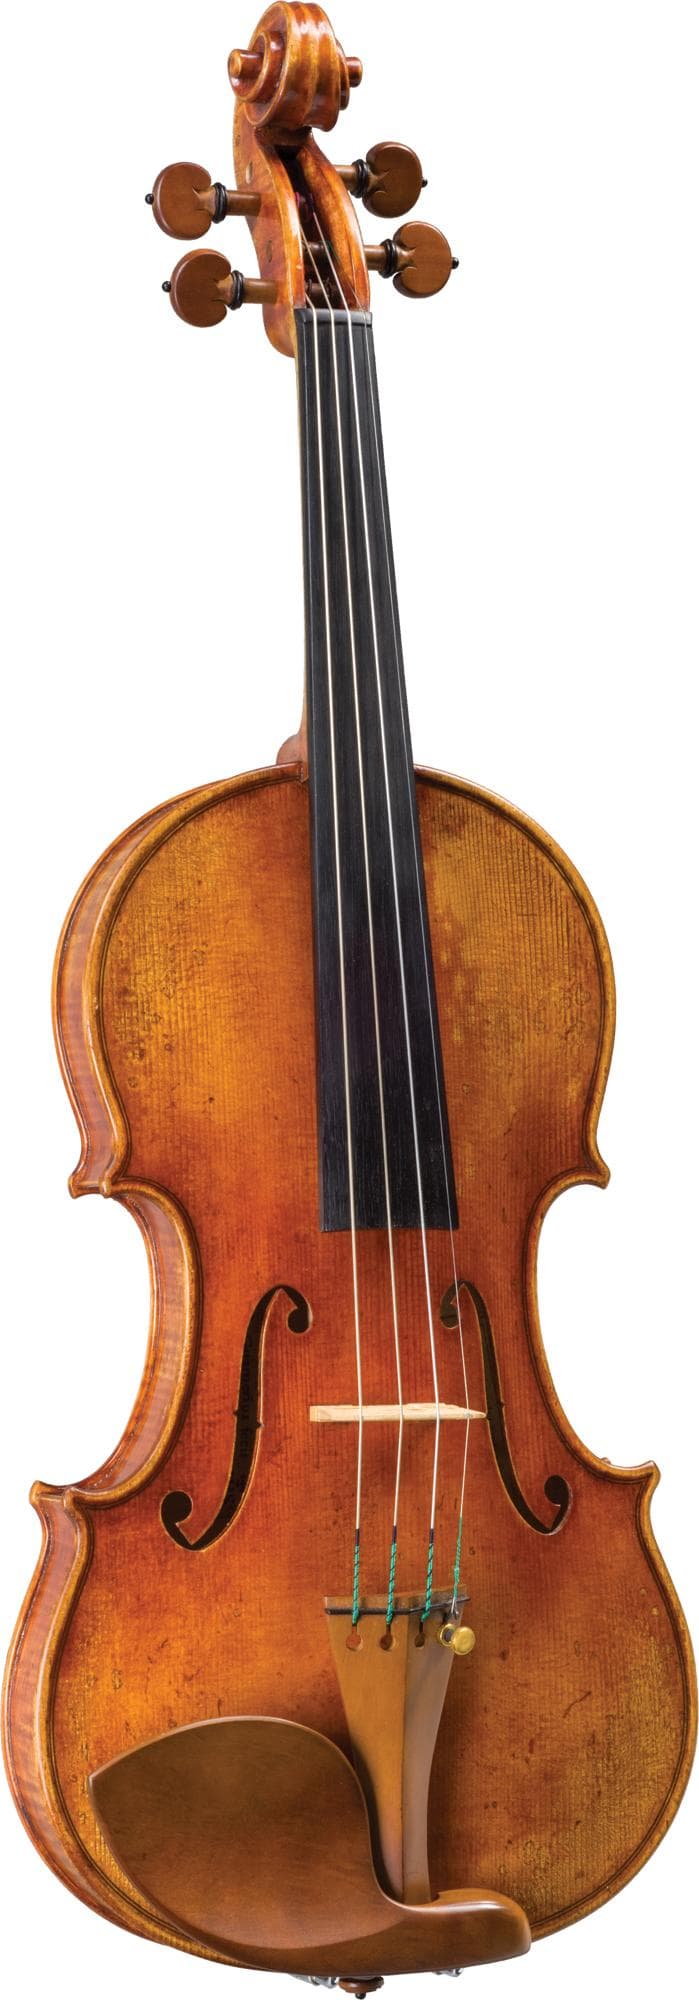 Pre-Owned John Cheng Limited Series Violin 4/4 Size